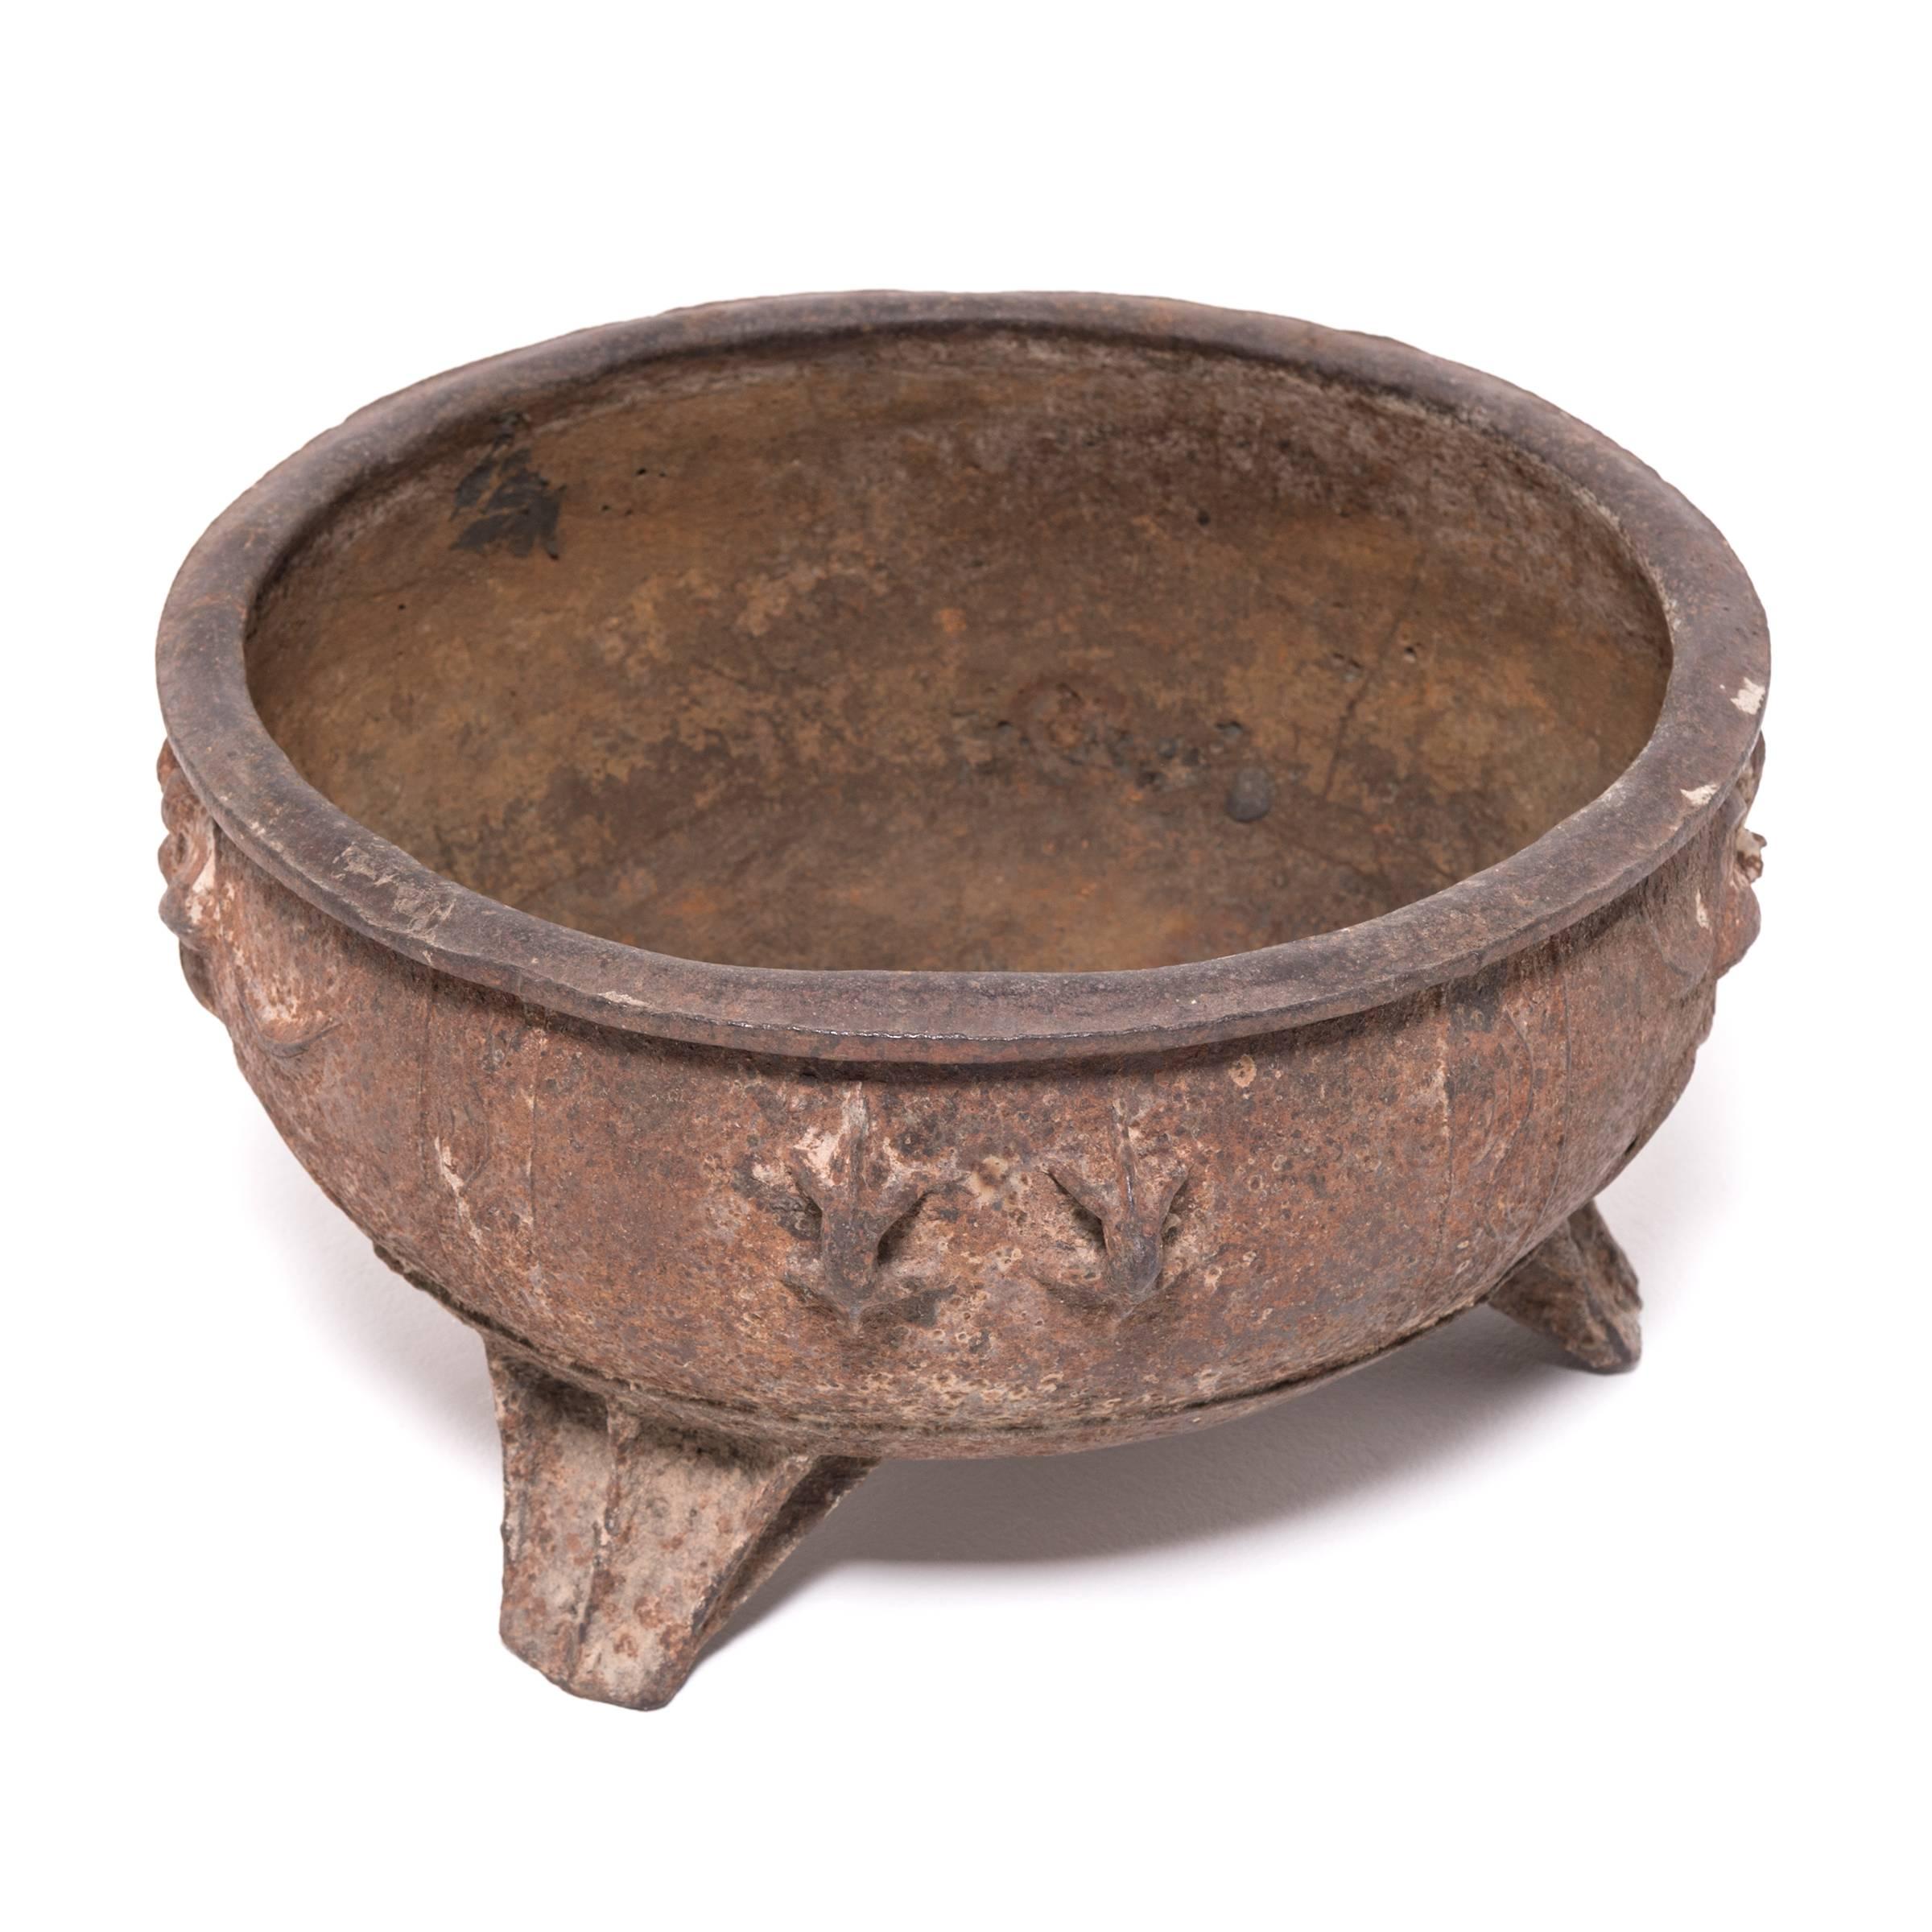 China was the earliest known civilization to make cast iron. It first appeared thousands of years ago during the illustrious Zhou dynasty. Made in the mid-19th century, this low, wide-mouth urn on tripod feet references the earliest forms of cast